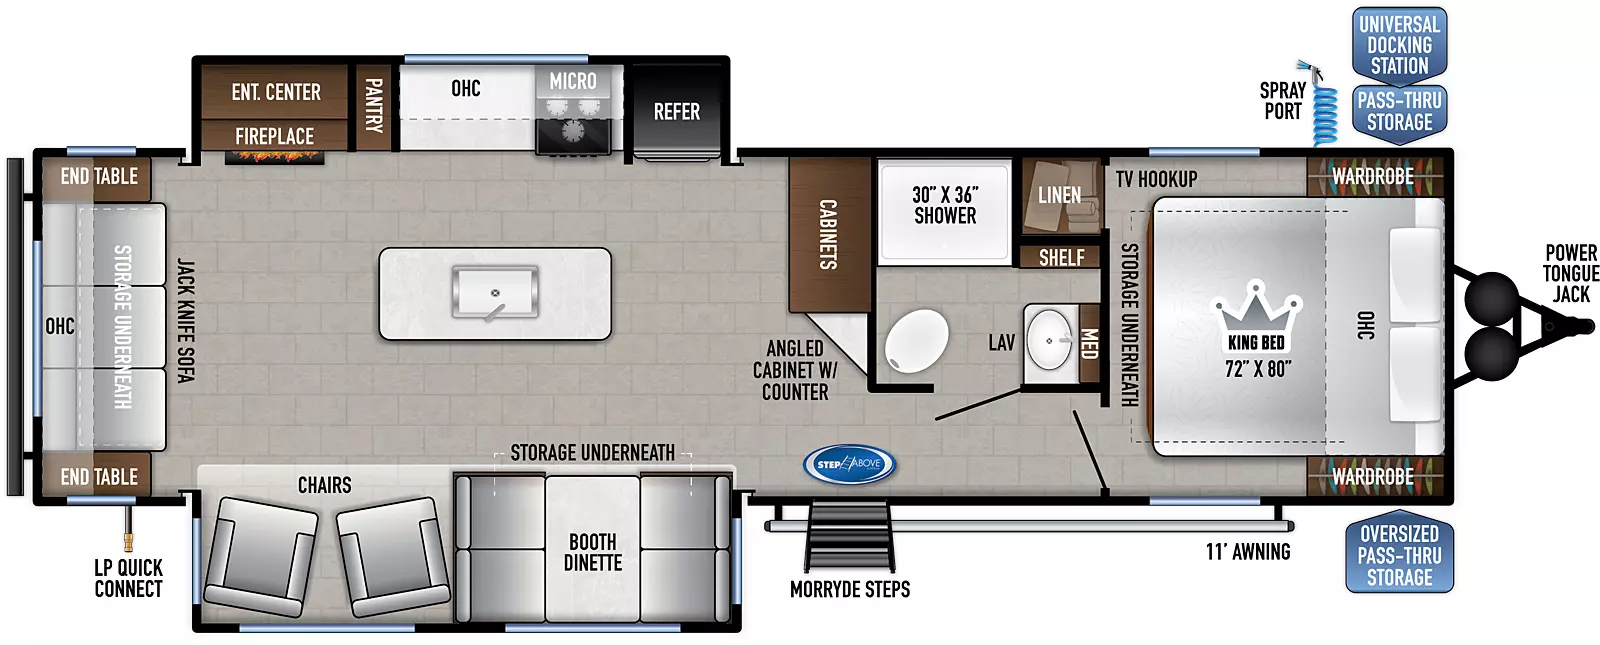 The 29K2S has two opposing slides, one on the off-door side and one on the door side, this floorplan has one entry door on the door side. Interior layout from front to back: front bedroom with king bed featuring overhead cabinets, bedside wards, TV hookup, linen cabinet, underbed storage and solid privacy door; side aisle bathroom with medicine cabinet above the sink, cabinet shelf, shower and porcelain toilet; kitchen living dining area has large cabinets and angled cabinet with counter, kitchen island with residential sink, off-door side slide features refrigerator, 3-burner cooktop with oven, overhead microwave and cabinets, kitchen counter space, pantry and entertainment center with fireplace; opposing door side slide has a booth dinette with storage underneath, two large picture windows, and two free standing recliners facing entertainment center and fireplace. jackknife sofa with 2 end tables and overhead cabinets along back wall! Exterior from front to back: Power tongue jack, oversized pass-thru storage on door side, universal docking station in pass-thru on off-door side with spray port; solid steps at entry door on door side, LP quick connect in door side rear and 11' awning.